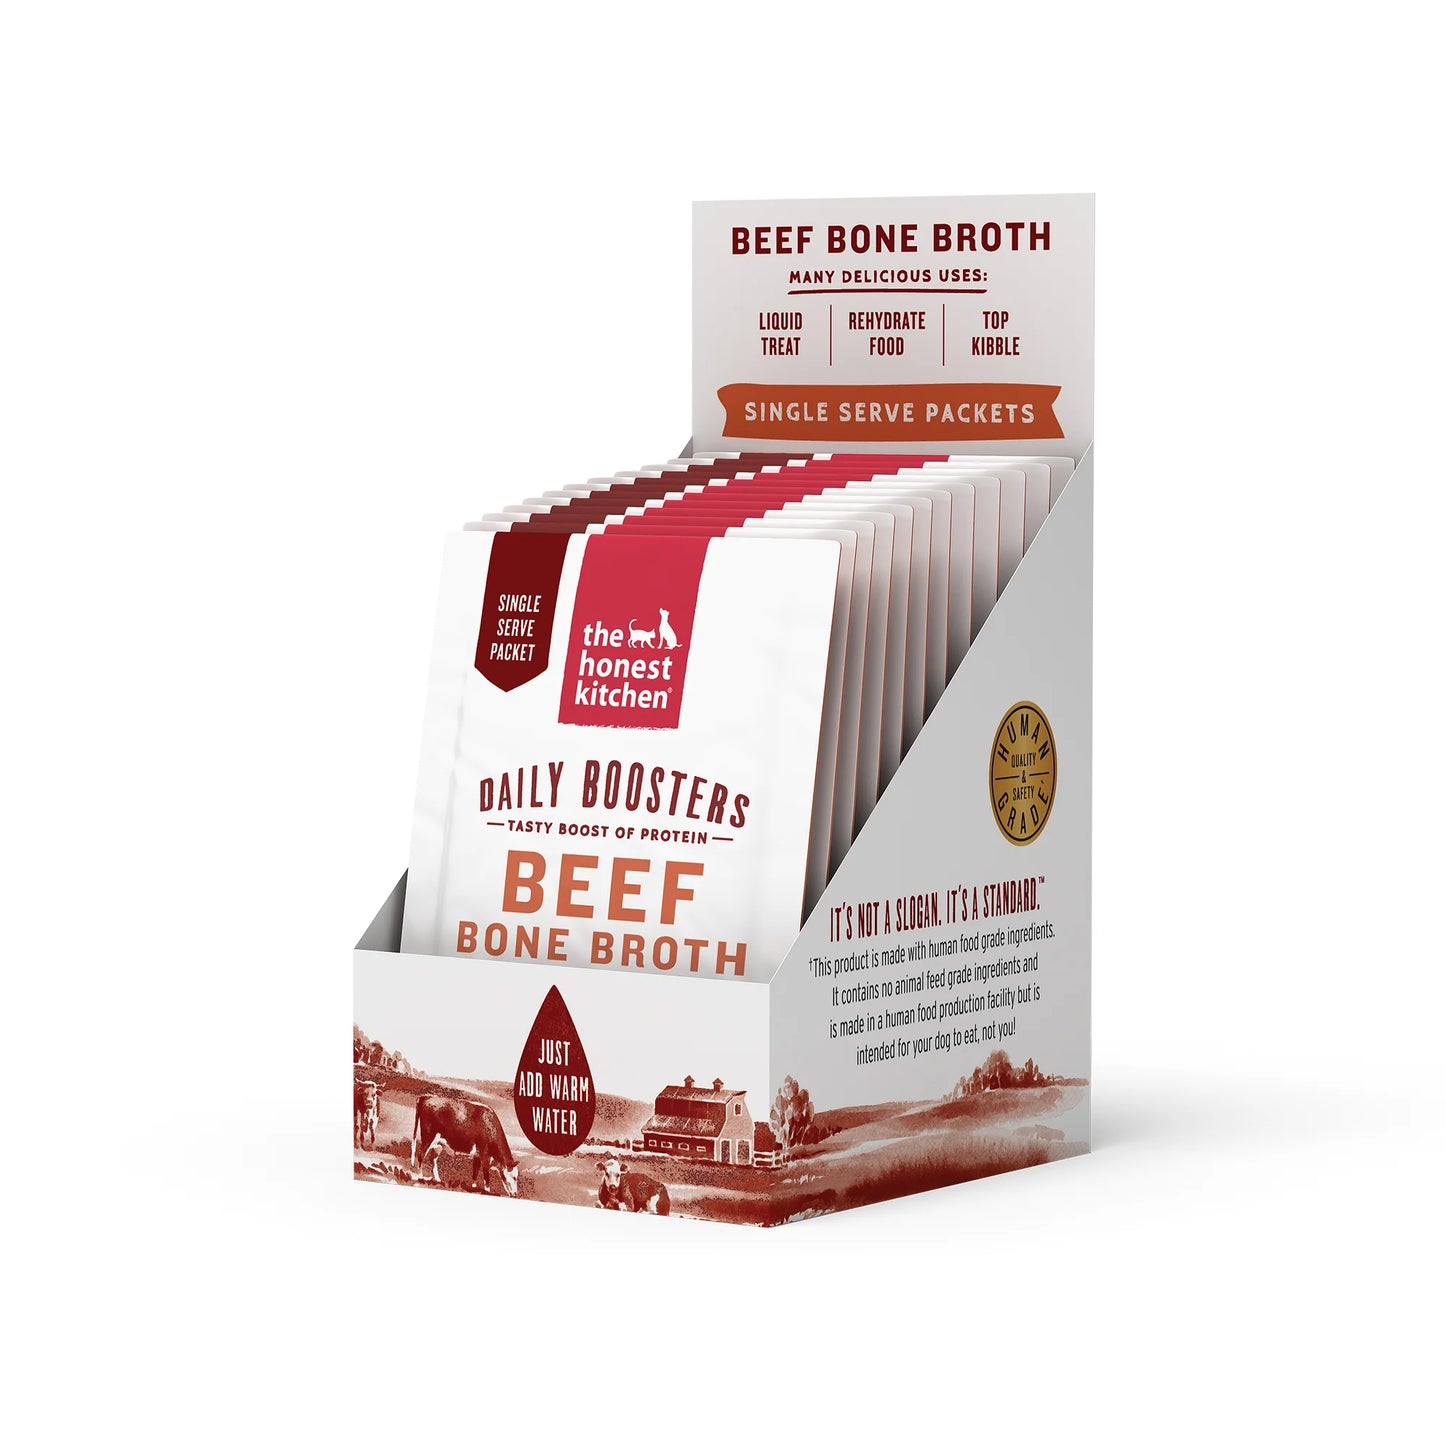 Daily Boosters Bone Broth Beef